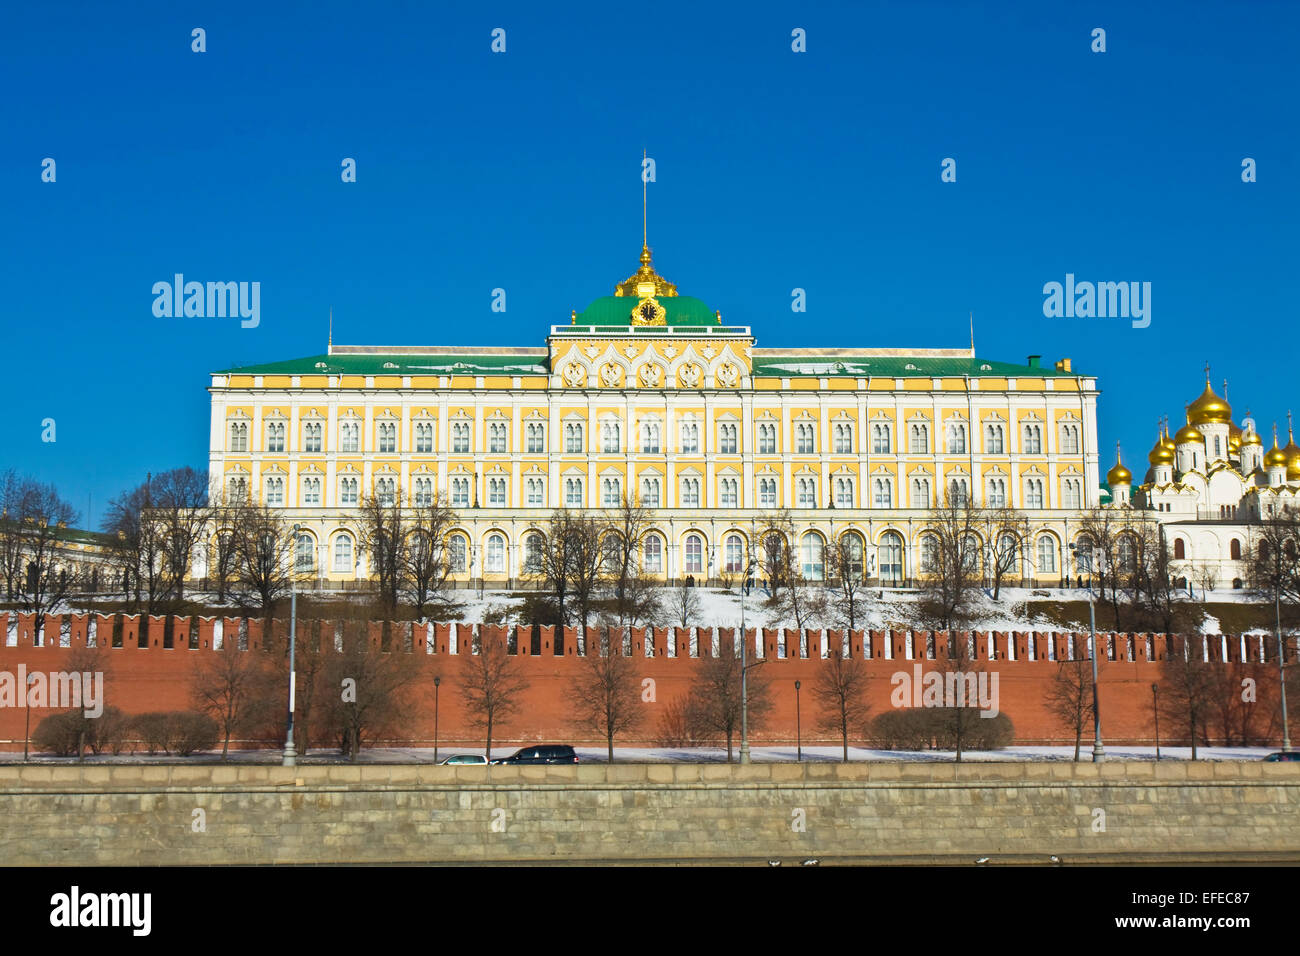 Moscow, Russia - March 10, 2012: Kremlin palace and one of Kremlin cathedrals in winter with snow. Stock Photo